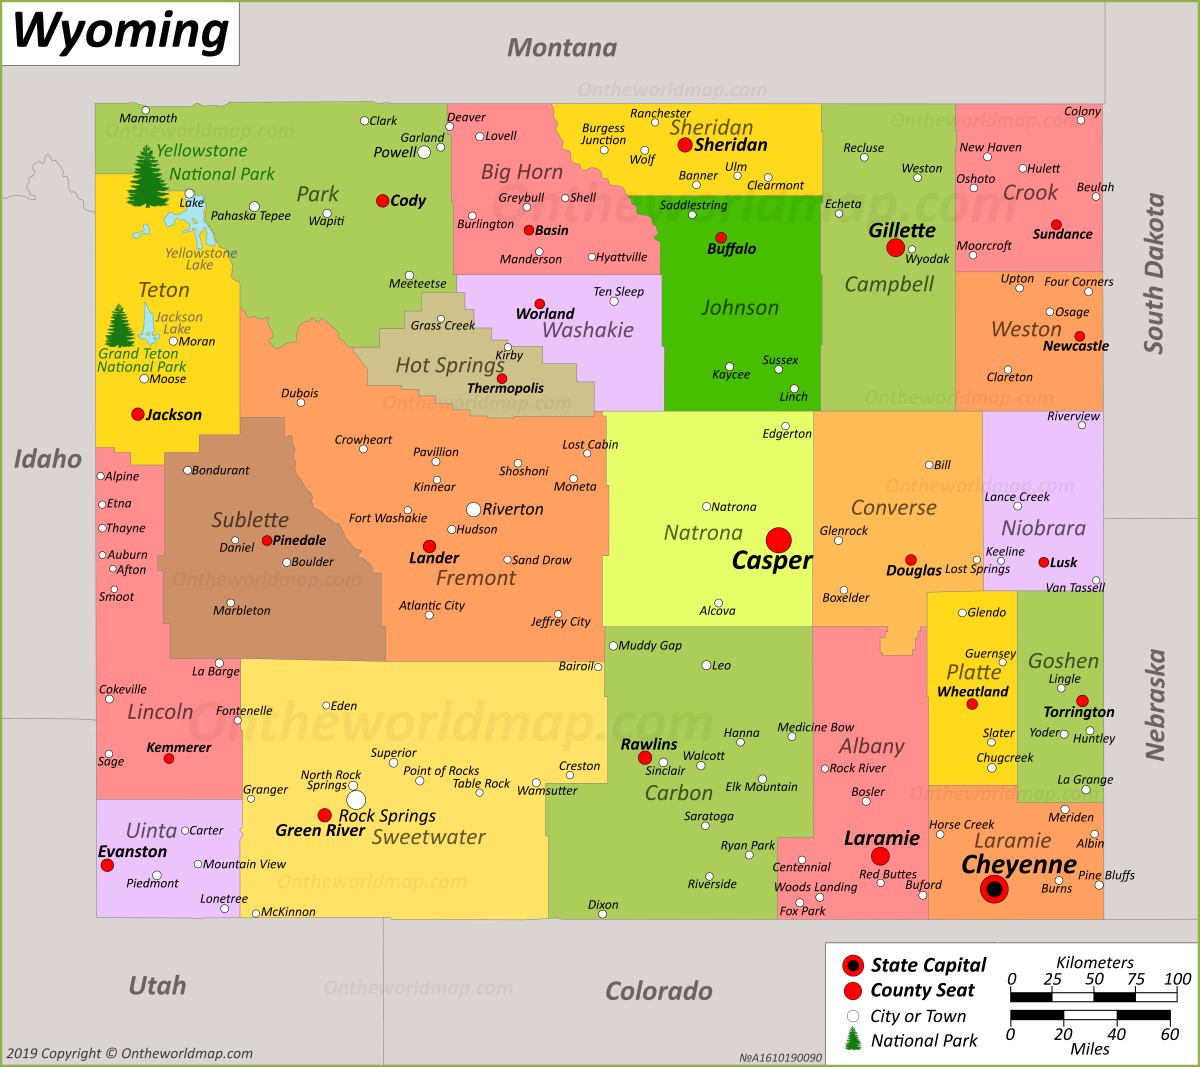 Wyoming State Maps | USA | Maps of Wyoming (WY)